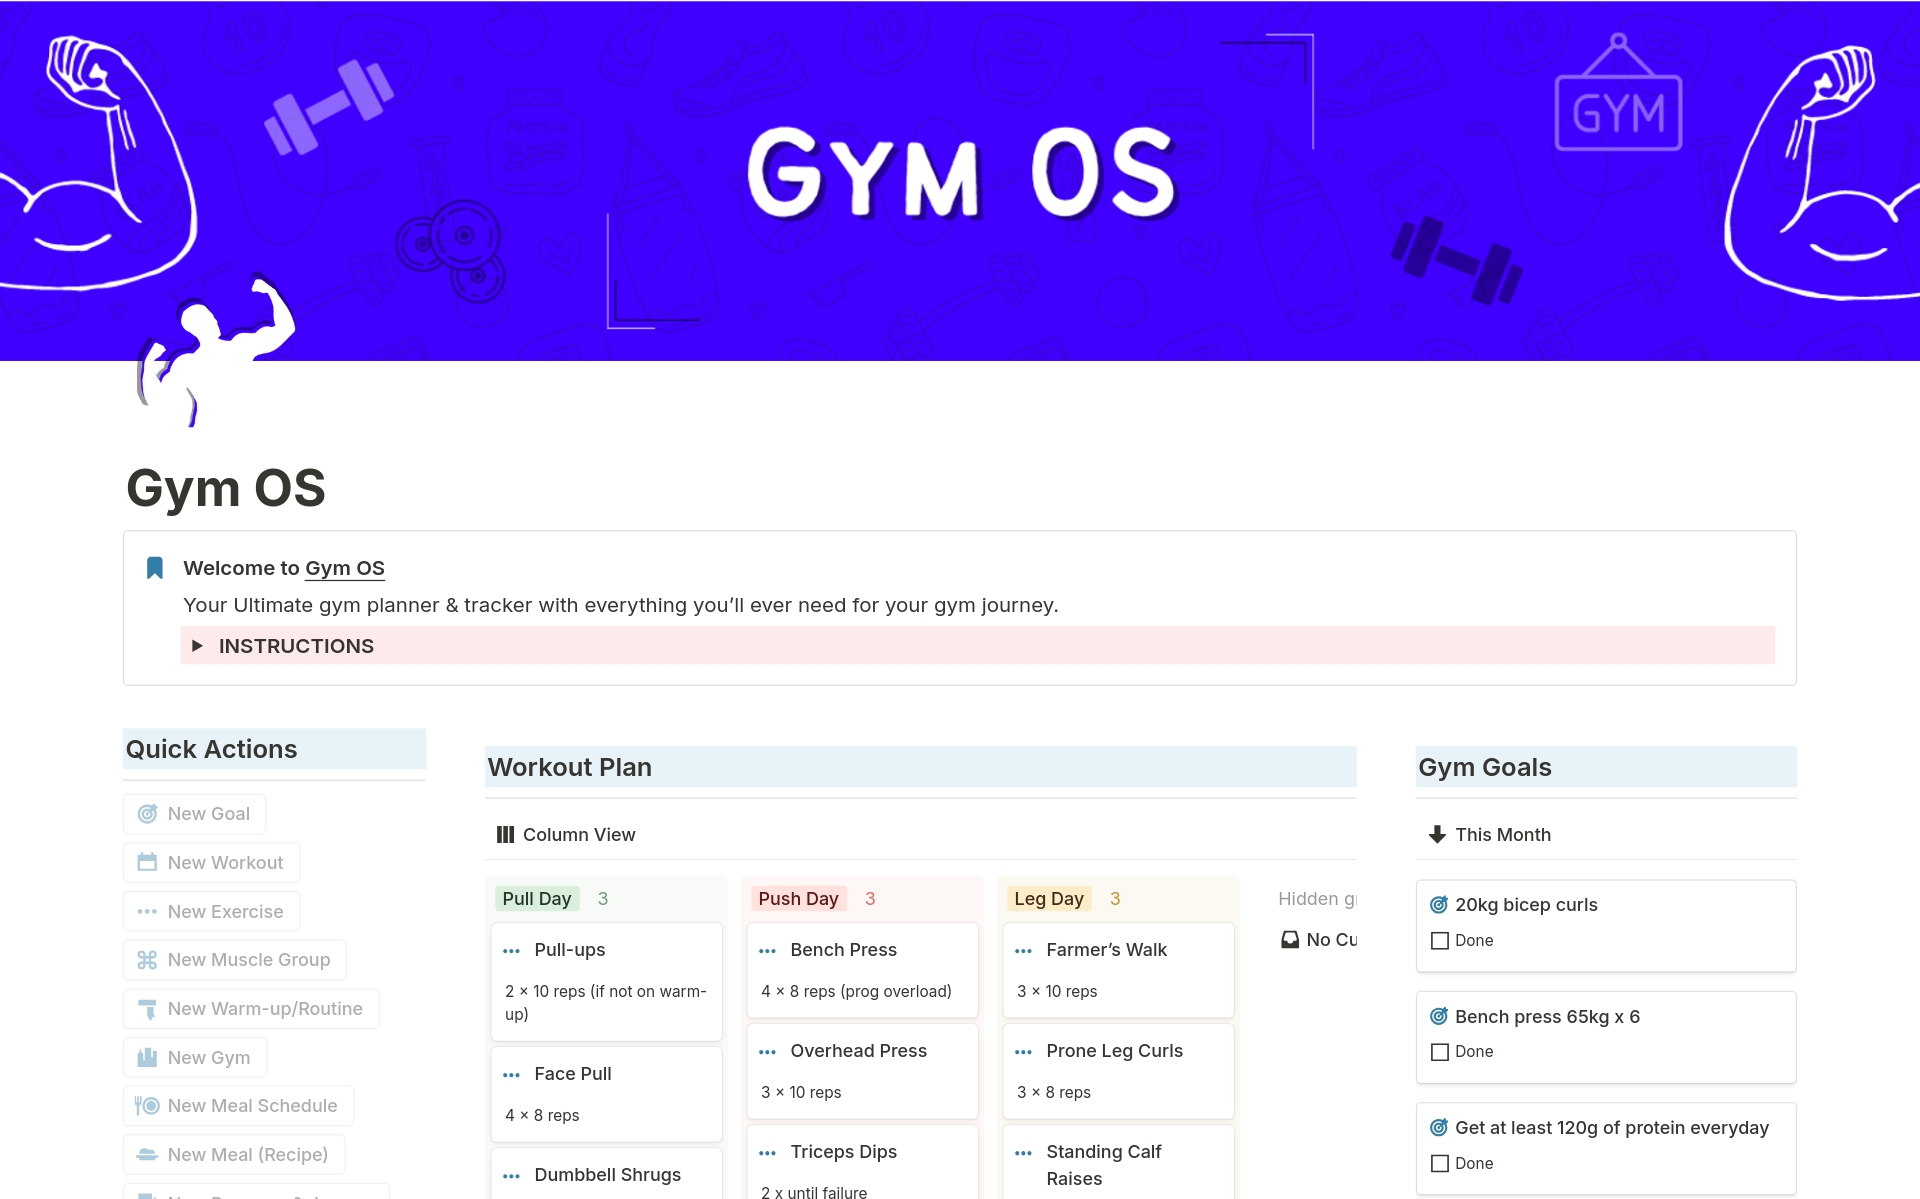 Maximize Your Gym Potential.
Are you going to the gym and you want to track your progress, calories & macros in one place?
You need a solid plan and tool to help you succeed.
Presenting you Gym OS.
An Ultimate solution for tracking everything associated with the gym in one place.